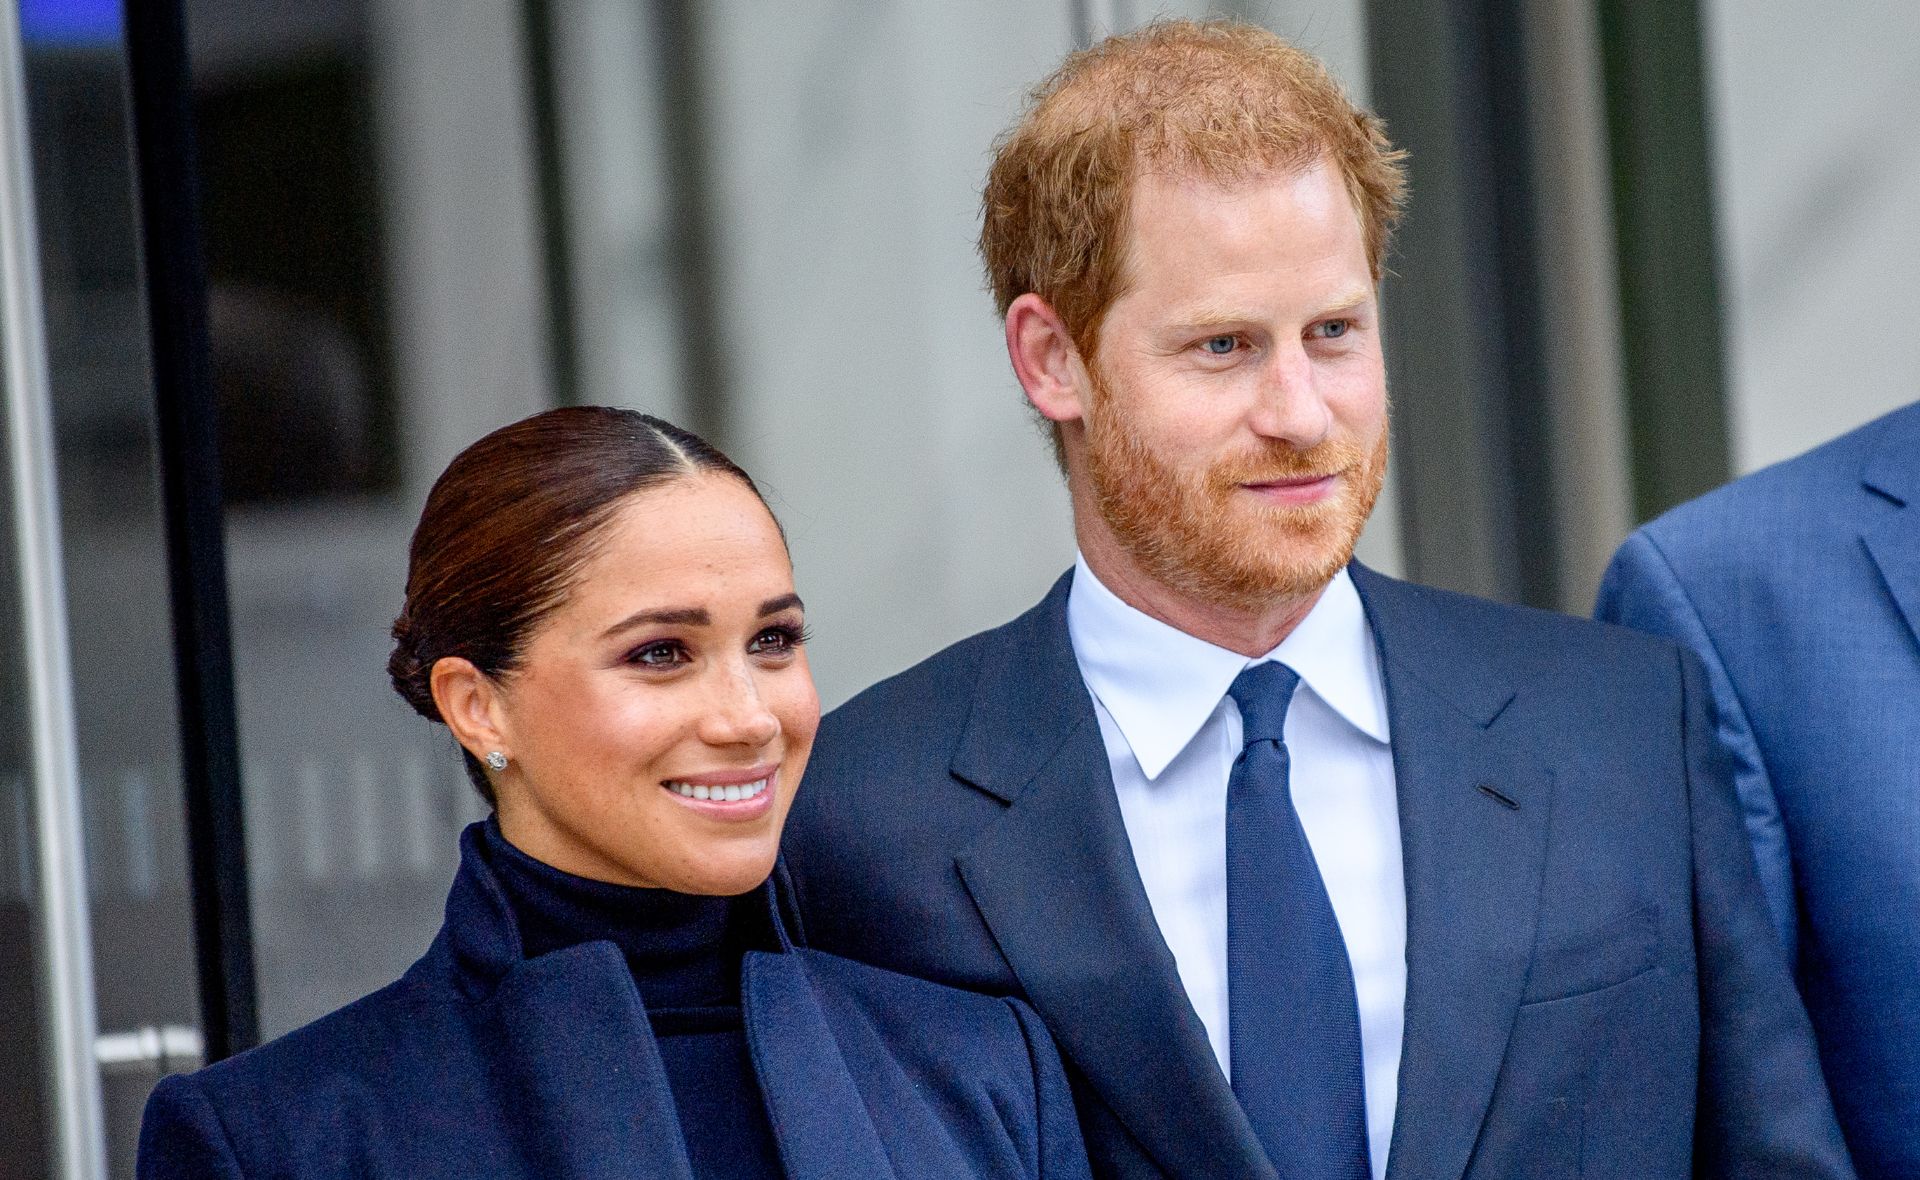 Meghan Markle confesses all about her “uncomfortable” experience in the days after *that* Oprah interview